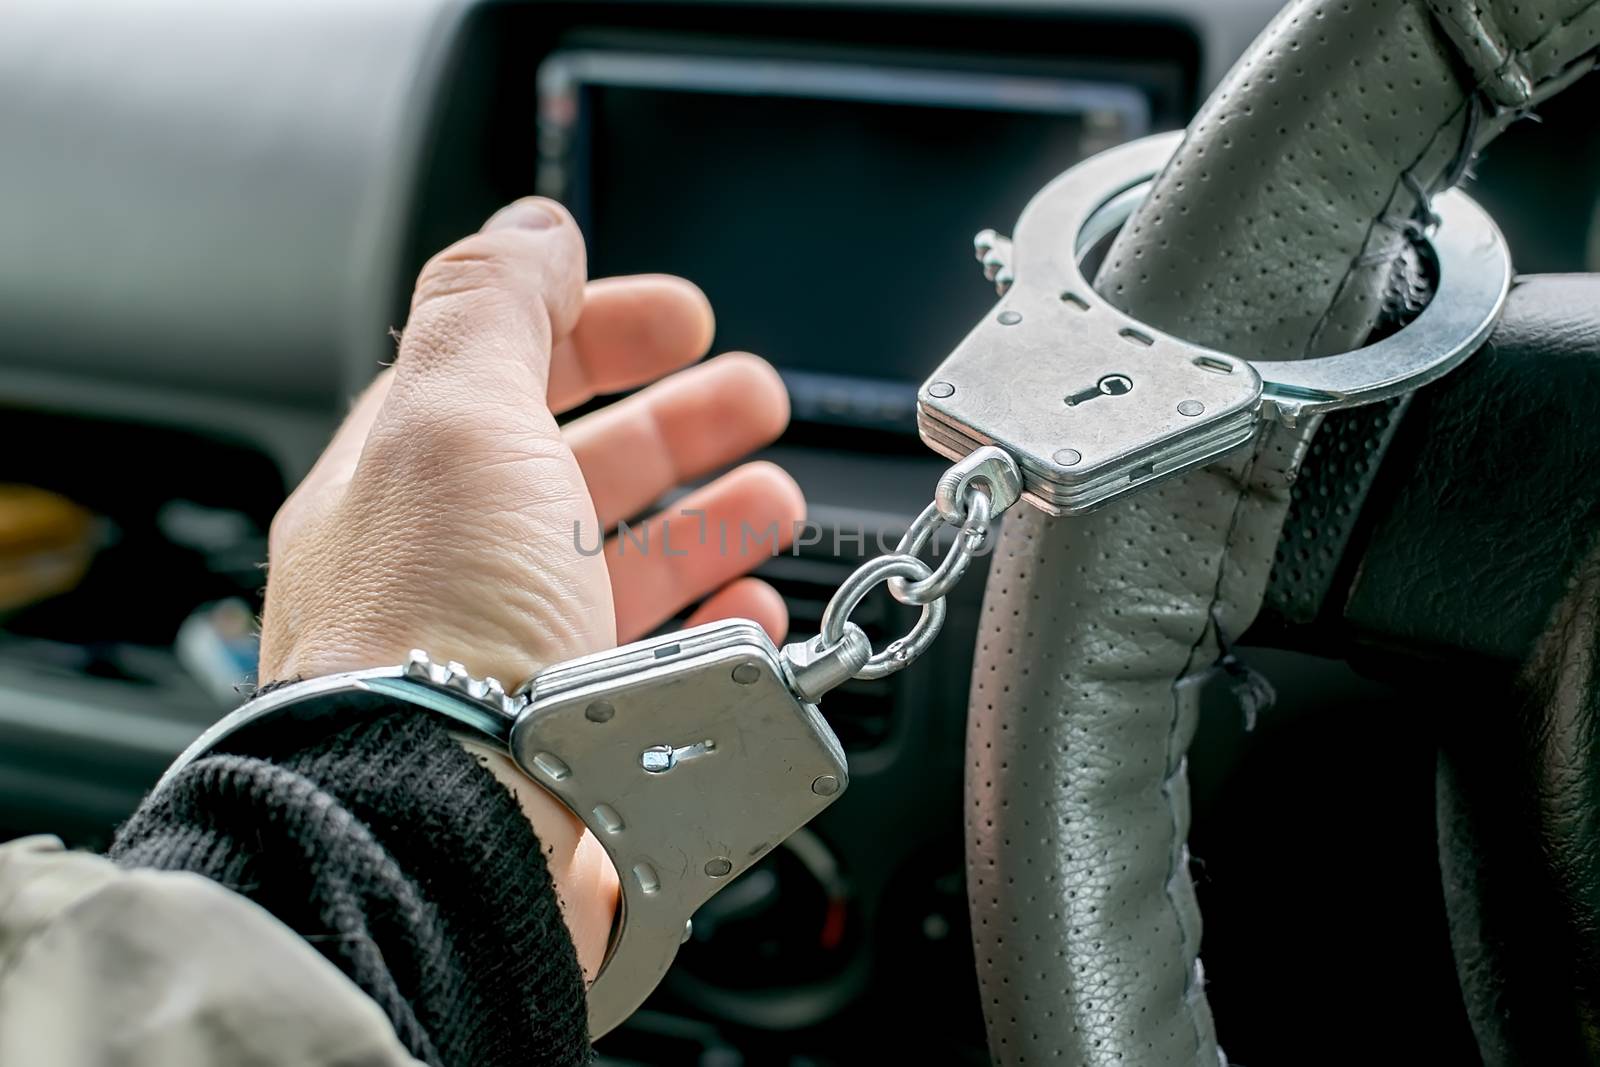 car driver's hand handcuffed to steering wheel, arrest, driving ban by jk3030